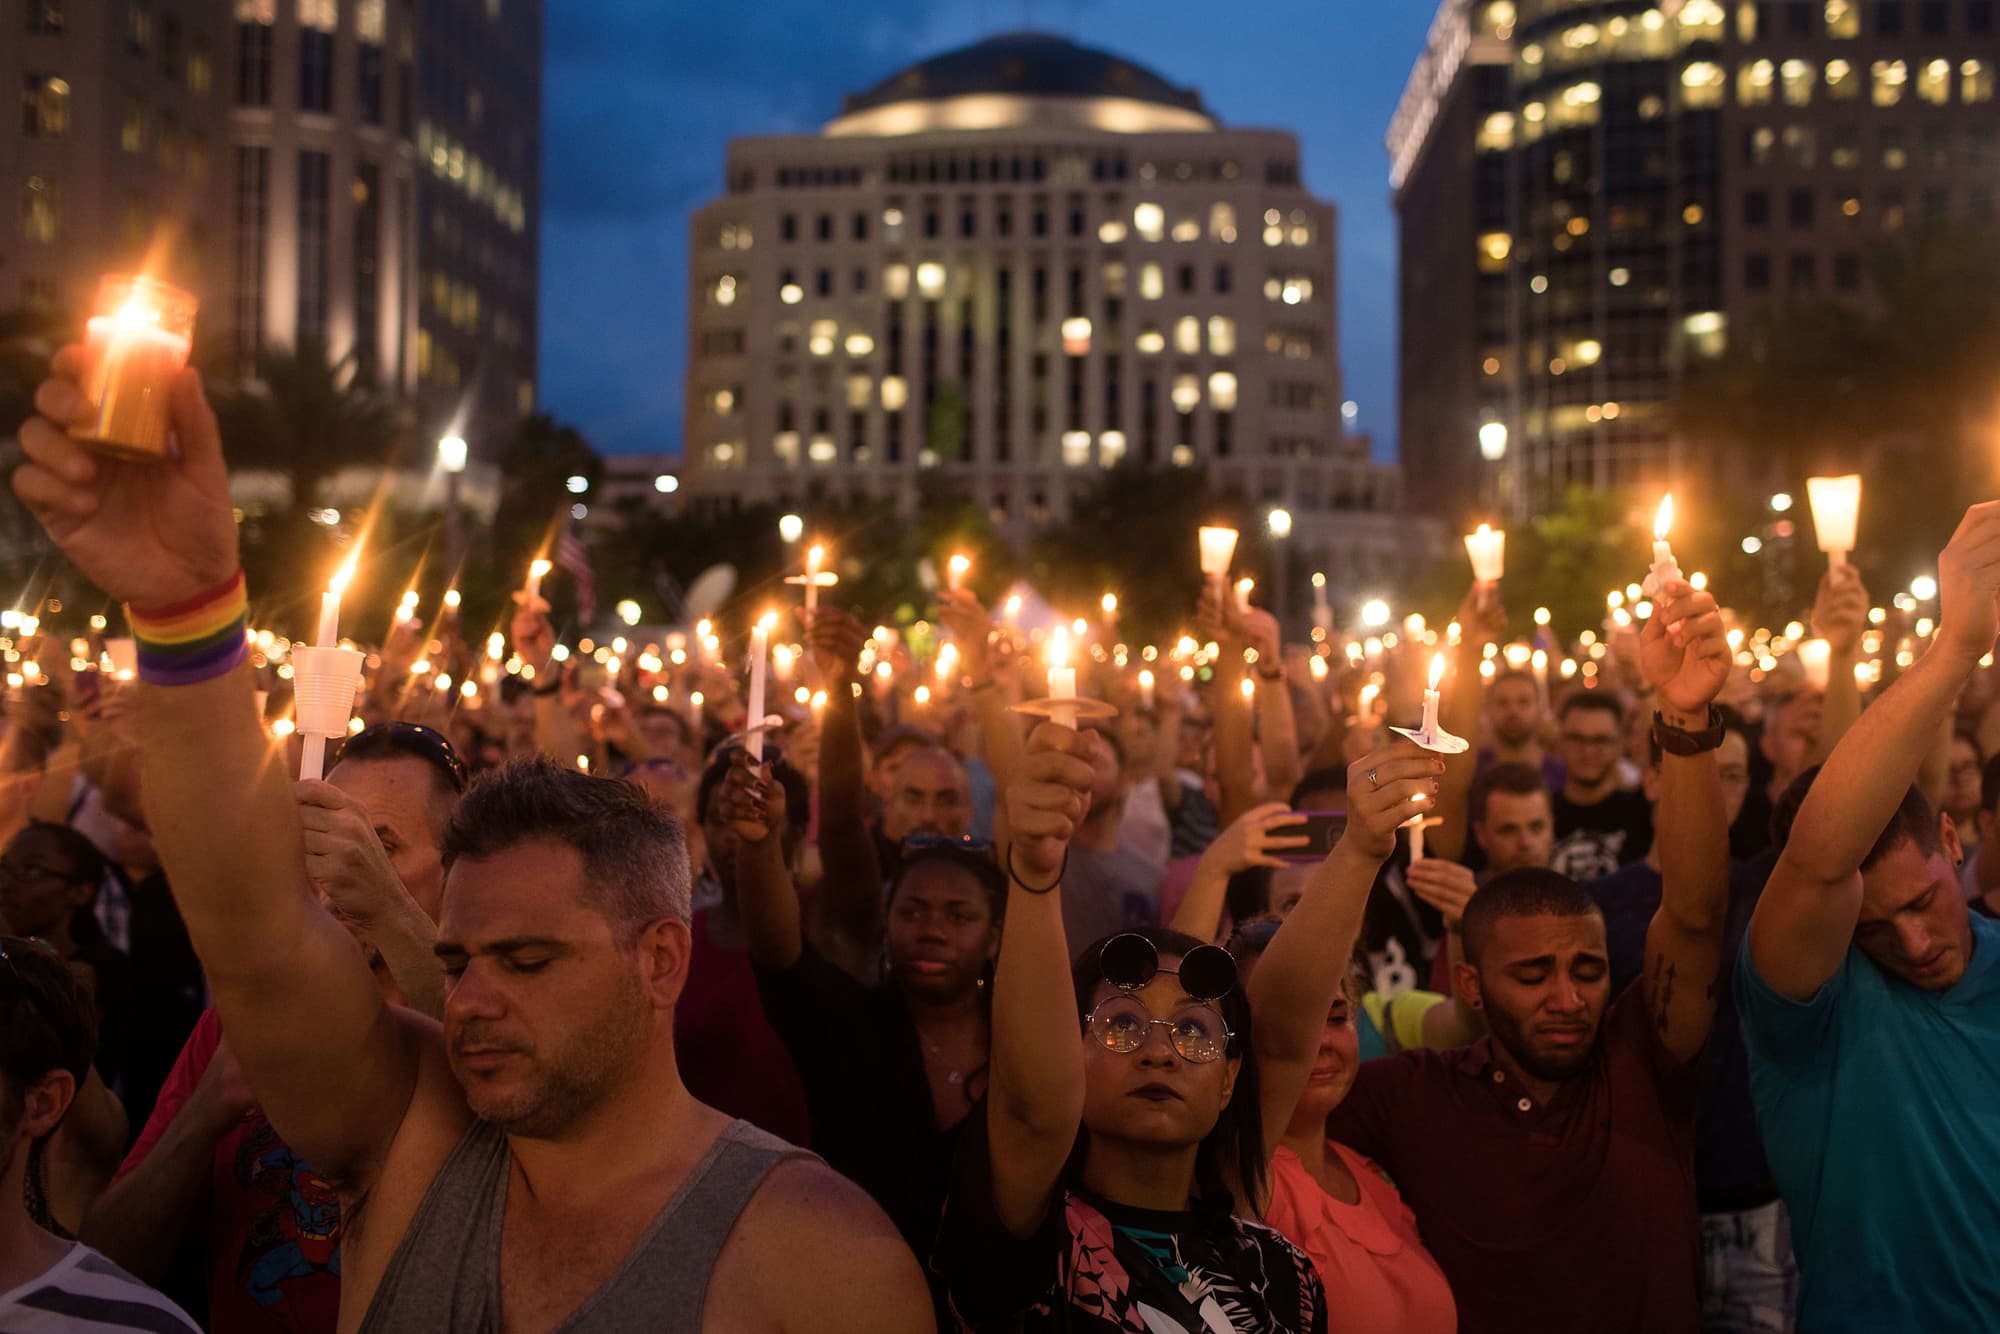 People hold candles during an evening memorial service for the victims of the Pulse Nightclub shootings, at the Dr. Phillips Center for the Performing Arts, June 13, 2016 in Orlando, Florida. The shooting at Pulse Nightclub, which killed 49 people and injured 53, is the worst mass-shooting event in American history. (Drew Angerer/Getty Images)